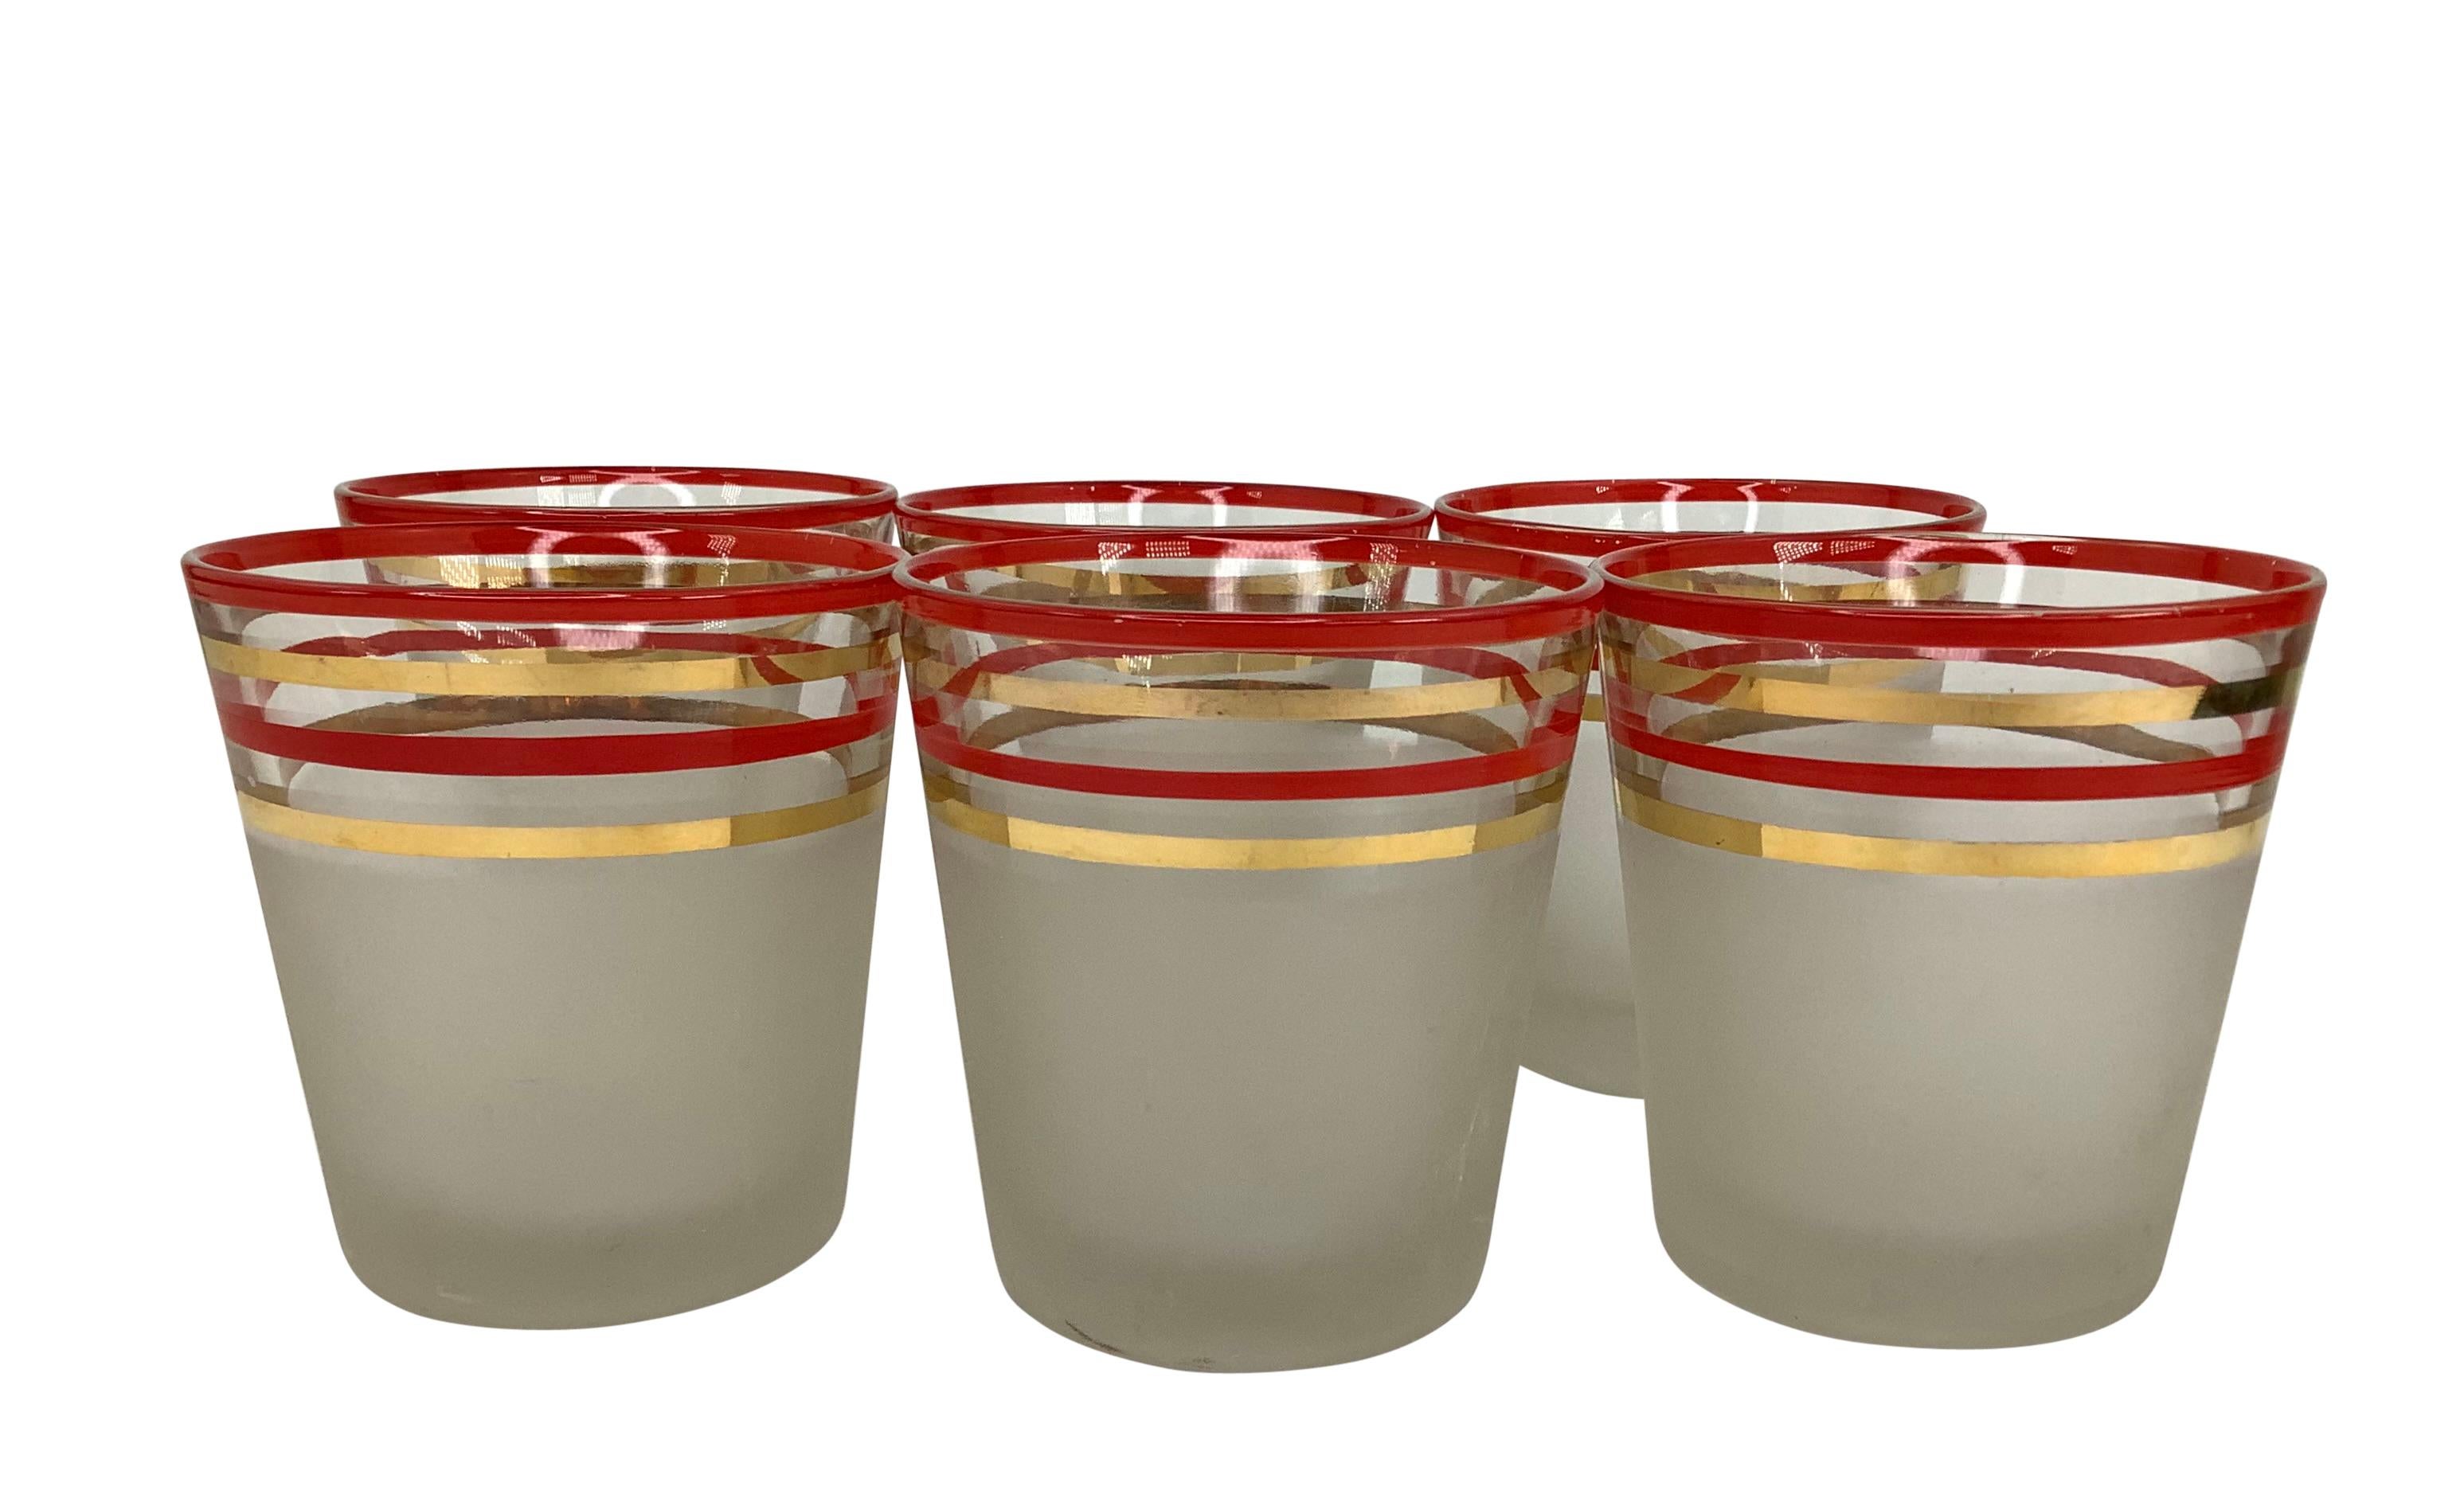  Set of 6 Old Fashioned Frosted Rocks Cocktail Glasses. The bottom two-thirds of each glass is frosted glass with red and gold bands on clear glass at the top. Glasses measure 3 1/4